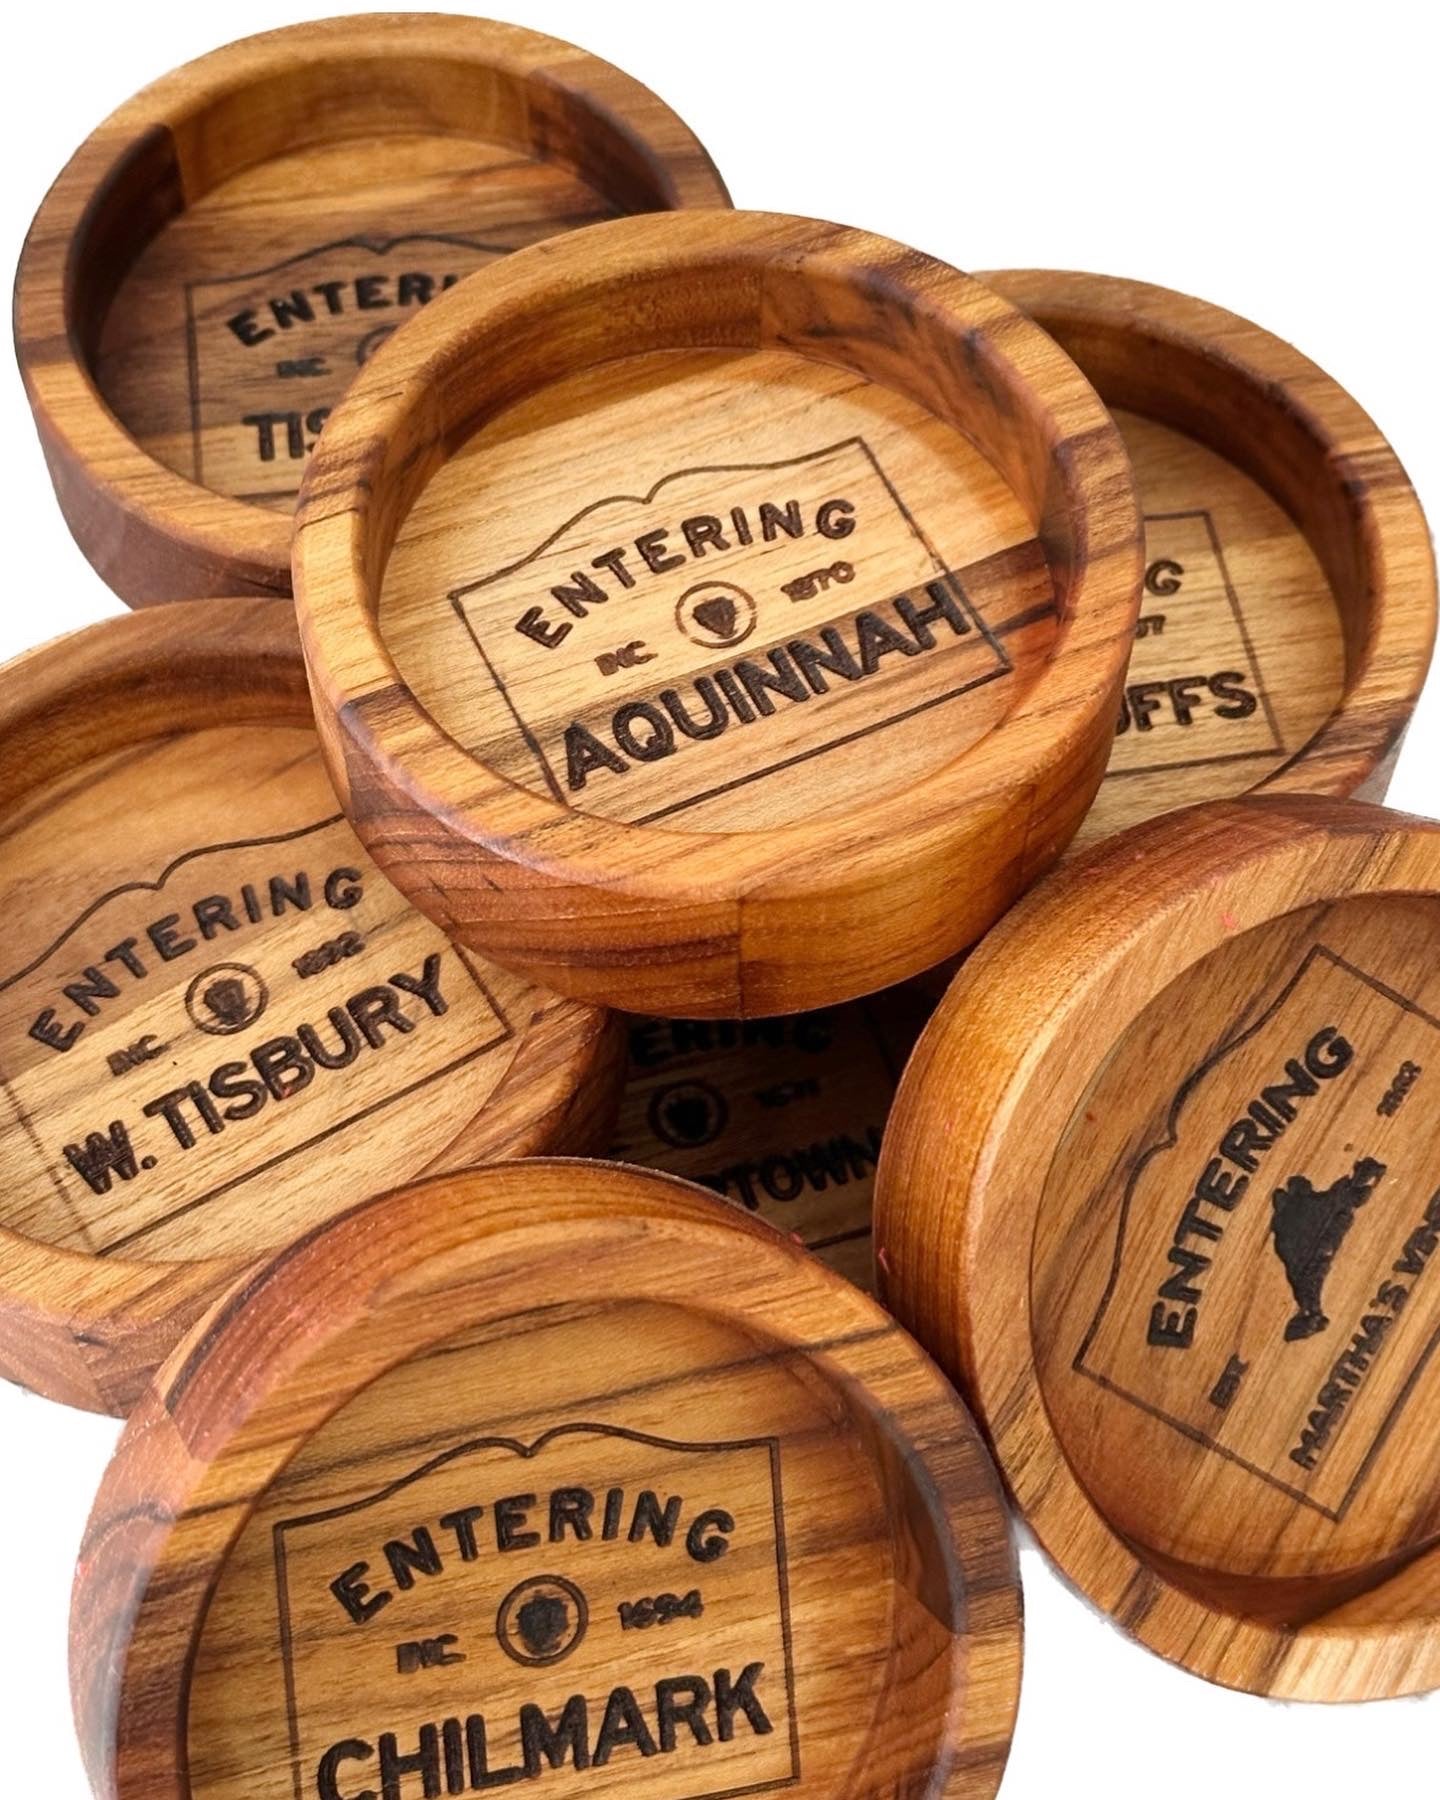 A close-up of a wooden wine coaster showcasing elegant engraving